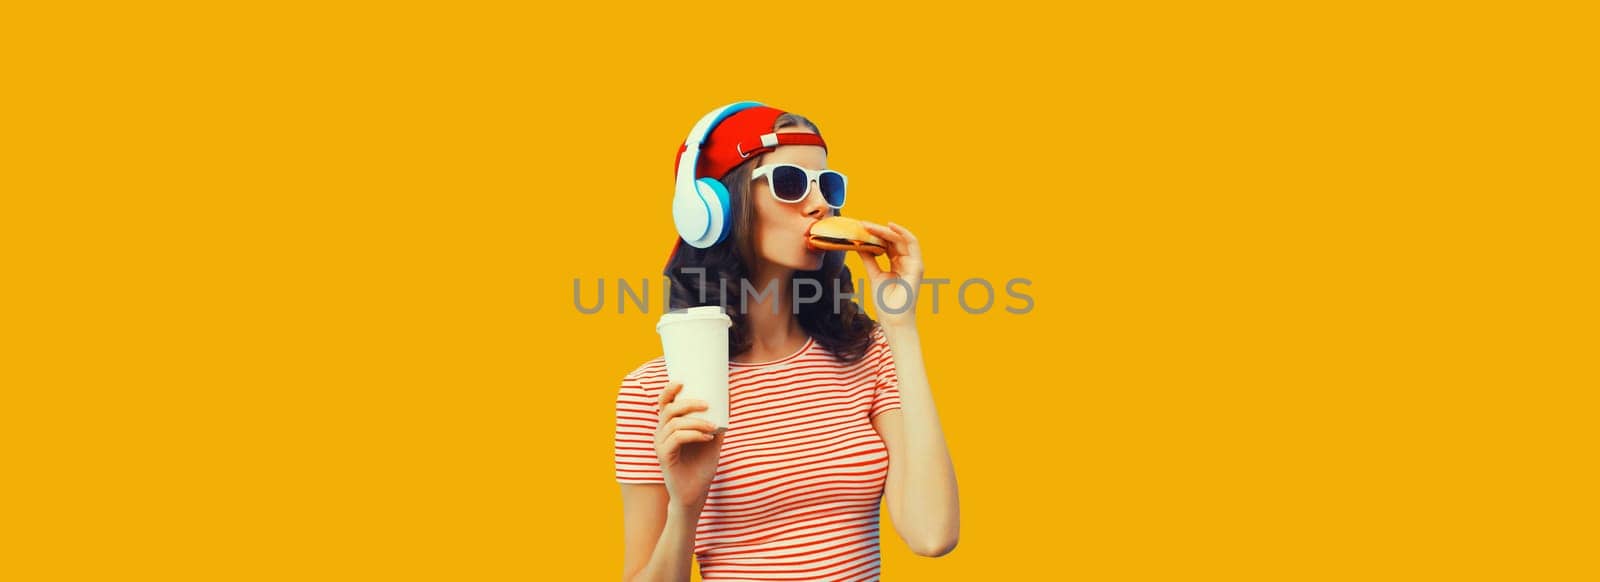 Stylish young woman listening to music in headphones eating burger fast food holding cup of coffee or juice on yellow background